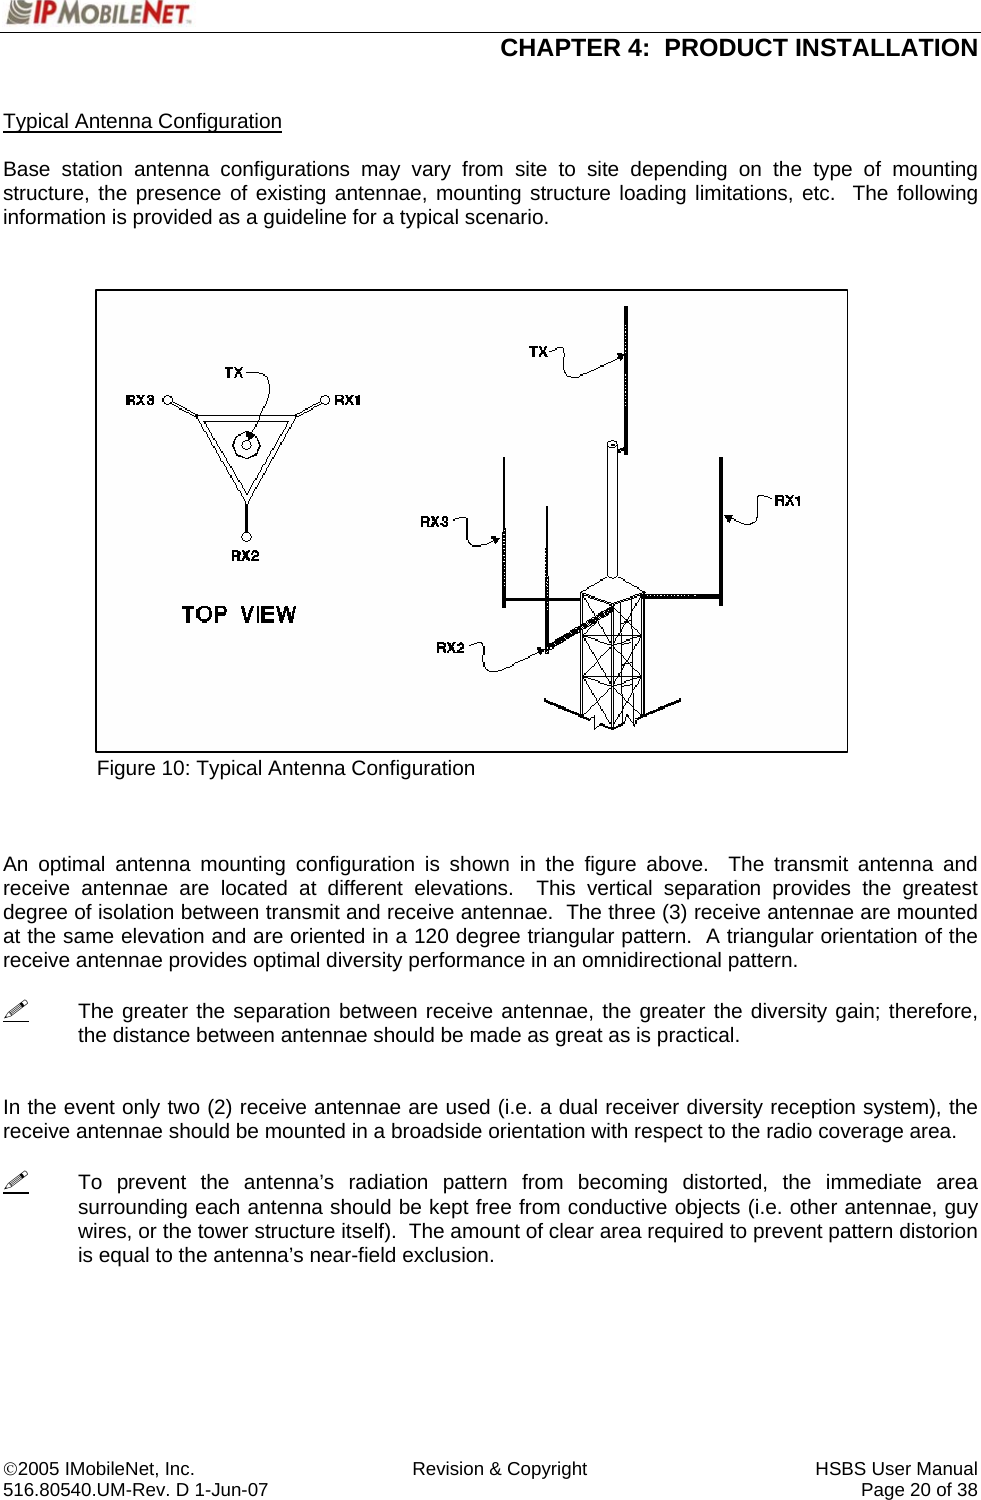  CHAPTER 4:  PRODUCT INSTALLATION  ©2005 IMobileNet, Inc.  Revision &amp; Copyright  HSBS User Manual 516.80540.UM-Rev. D 1-Jun-07     Page 20 of 38   Typical Antenna Configuration  Base station antenna configurations may vary from site to site depending on the type of mounting structure, the presence of existing antennae, mounting structure loading limitations, etc.  The following information is provided as a guideline for a typical scenario.                         Figure 10: Typical Antenna Configuration    An optimal antenna mounting configuration is shown in the figure above.  The transmit antenna and receive antennae are located at different elevations.  This vertical separation provides the greatest degree of isolation between transmit and receive antennae.  The three (3) receive antennae are mounted at the same elevation and are oriented in a 120 degree triangular pattern.  A triangular orientation of the receive antennae provides optimal diversity performance in an omnidirectional pattern.    The greater the separation between receive antennae, the greater the diversity gain; therefore, the distance between antennae should be made as great as is practical.   In the event only two (2) receive antennae are used (i.e. a dual receiver diversity reception system), the receive antennae should be mounted in a broadside orientation with respect to the radio coverage area.      To prevent the antenna’s radiation pattern from becoming distorted, the immediate area surrounding each antenna should be kept free from conductive objects (i.e. other antennae, guy wires, or the tower structure itself).  The amount of clear area required to prevent pattern distorion is equal to the antenna’s near-field exclusion.   